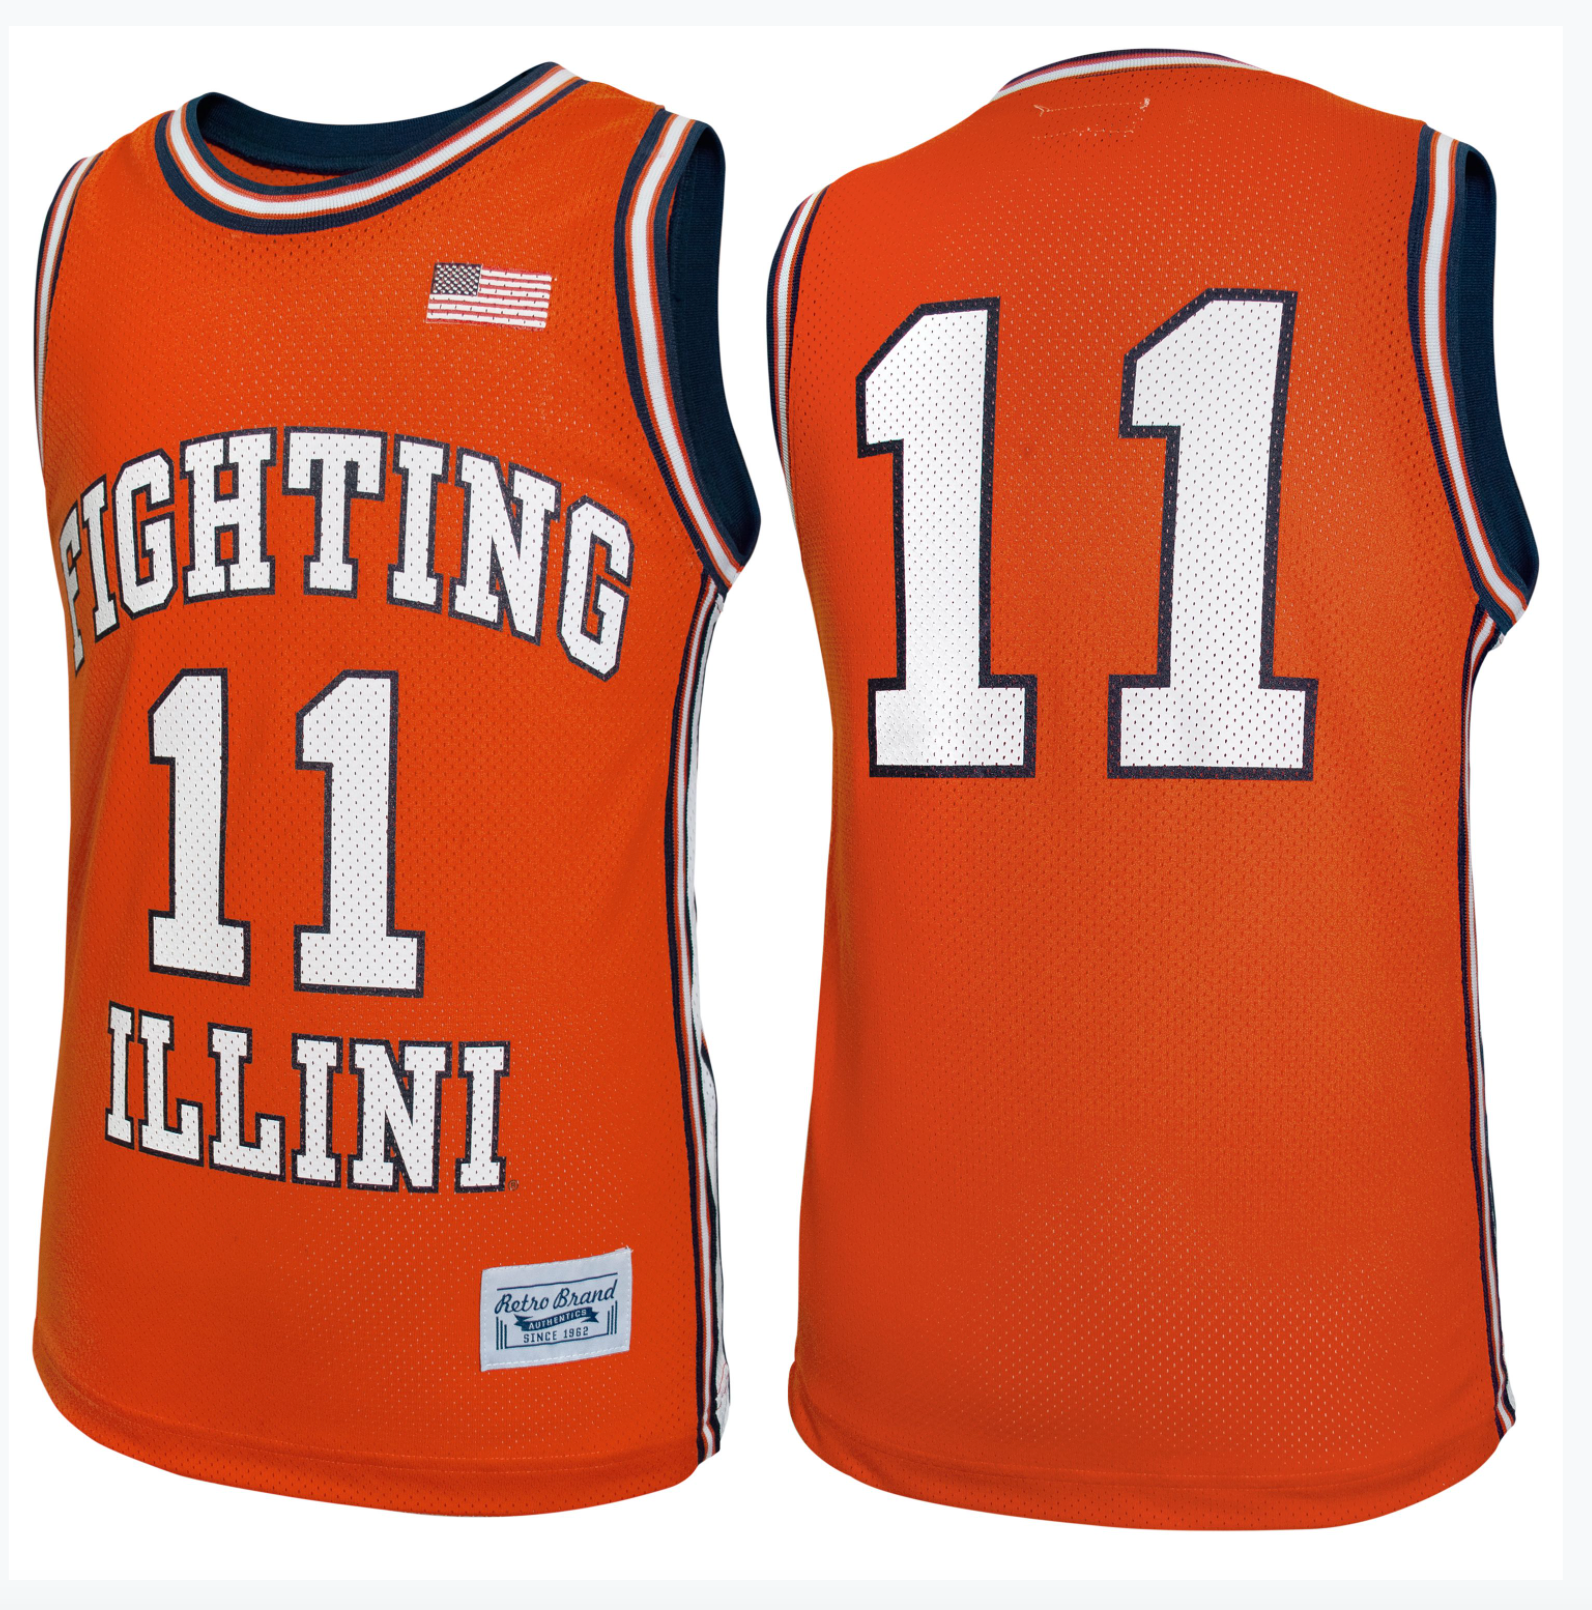 Fighting Illini track and field legends jersey